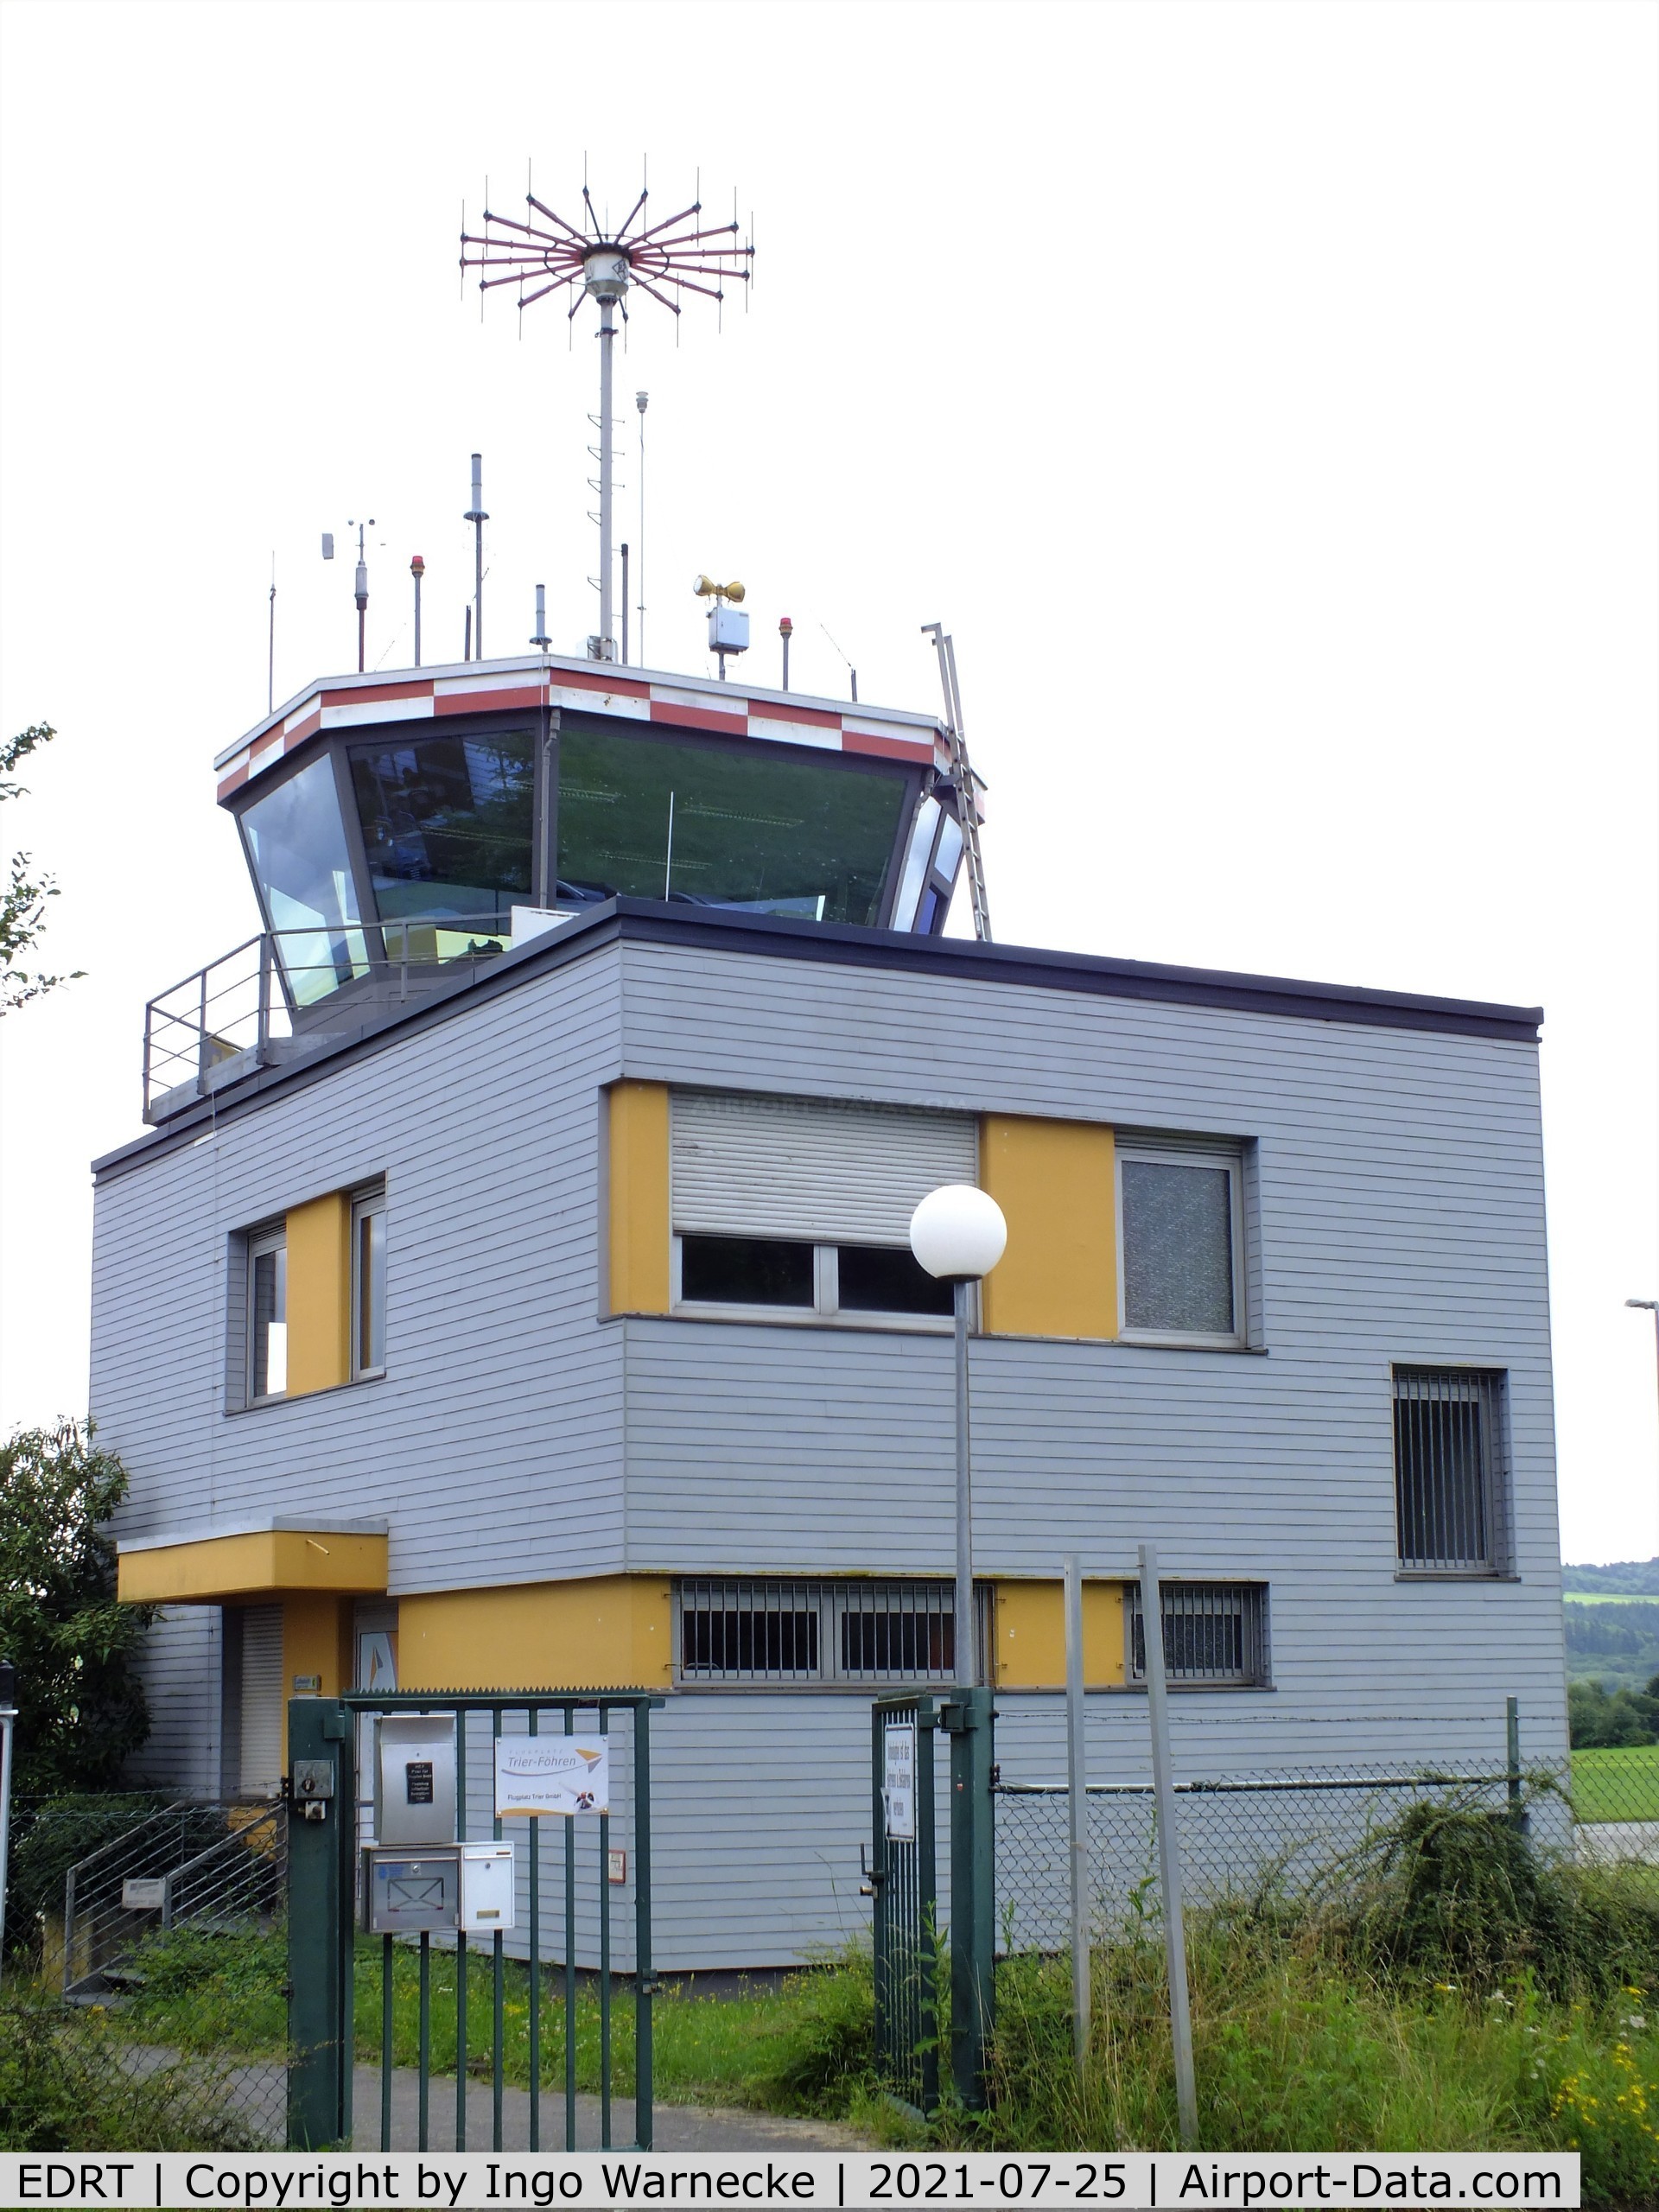 EDRT Airport - landside view of the tower at Trier-Föhren airfield